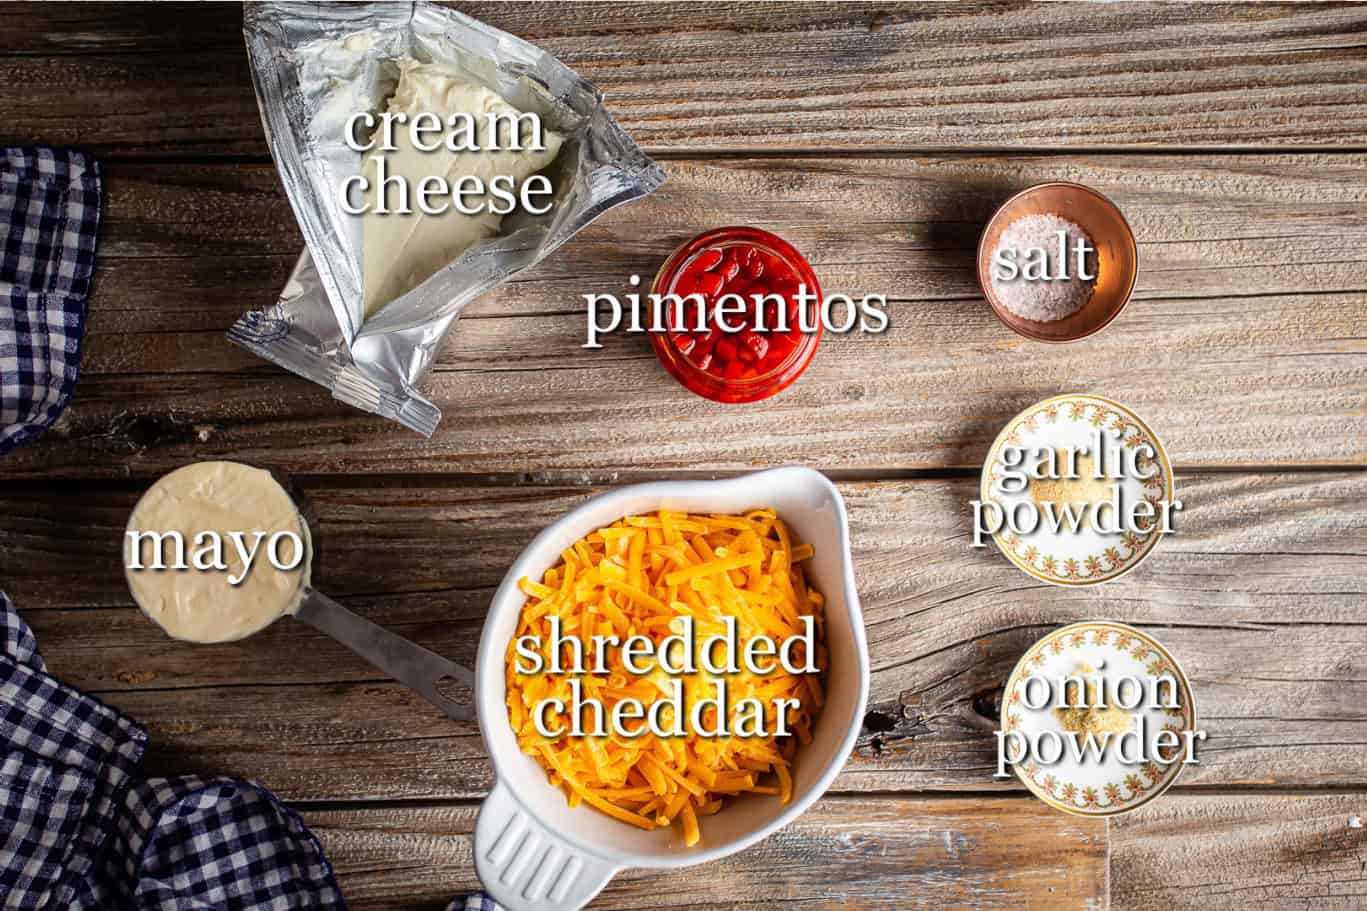 Ingredients for making pimento cheese, with text labels.